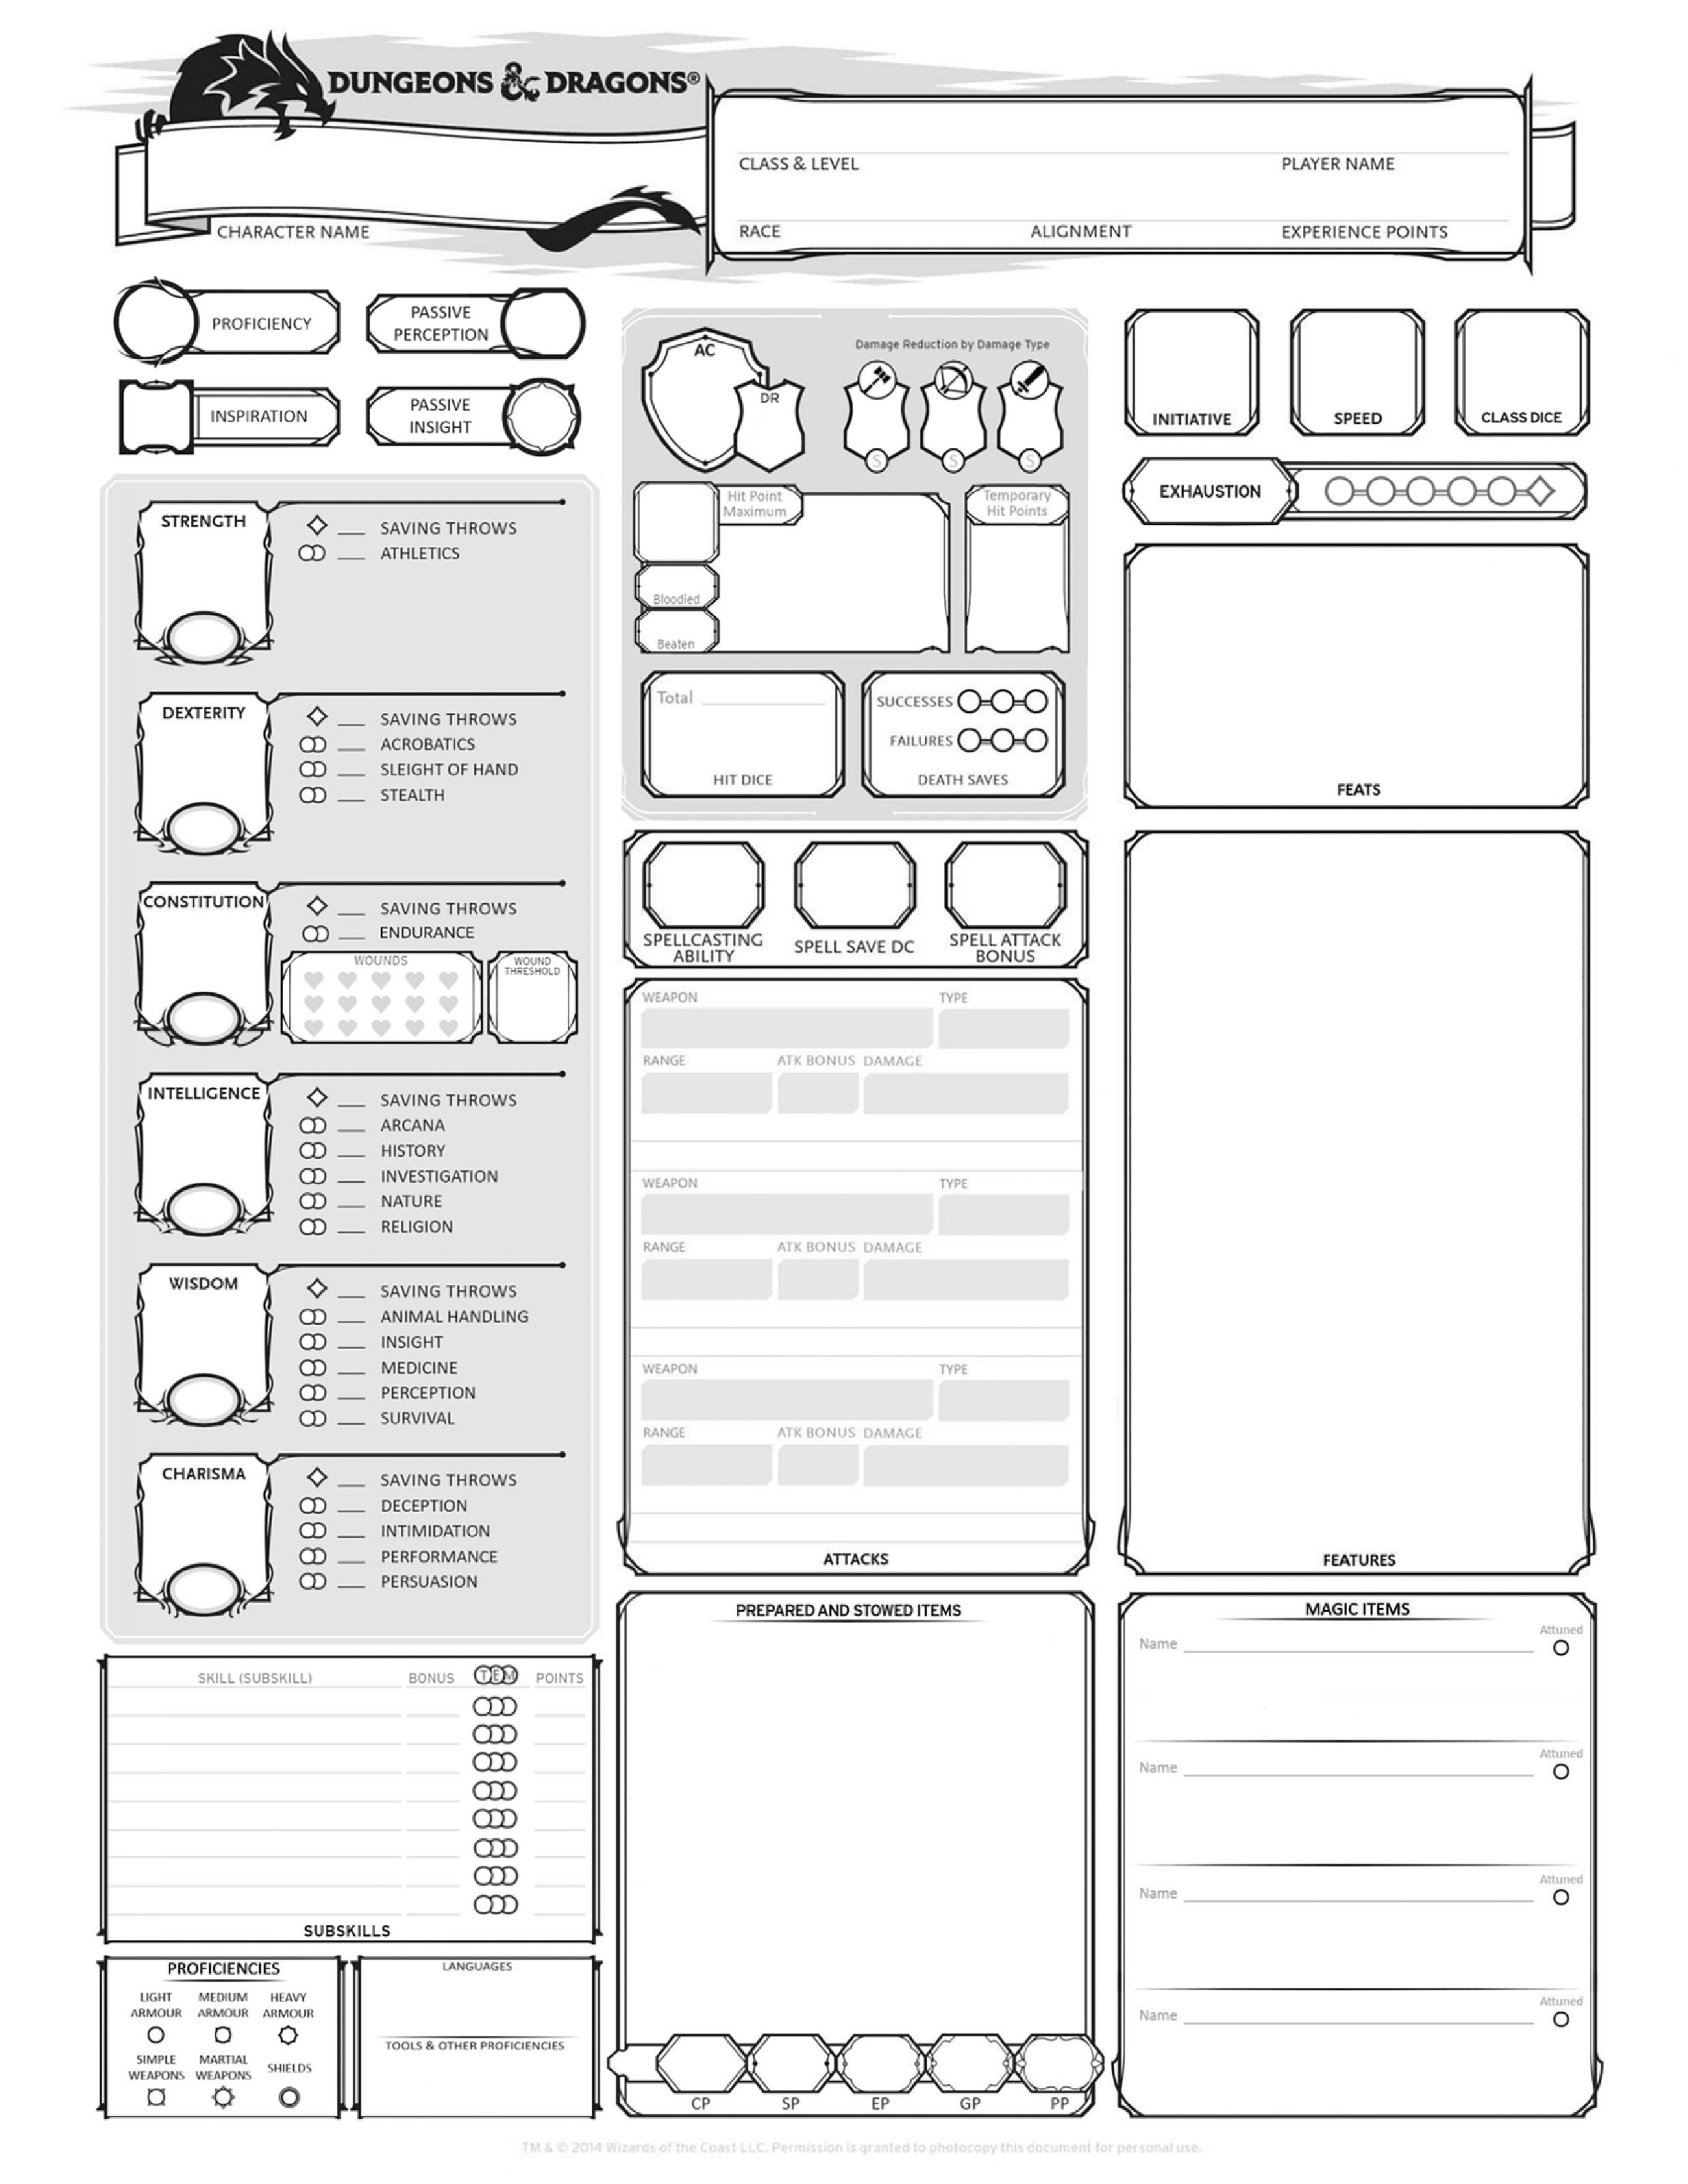 5e character builder step by step